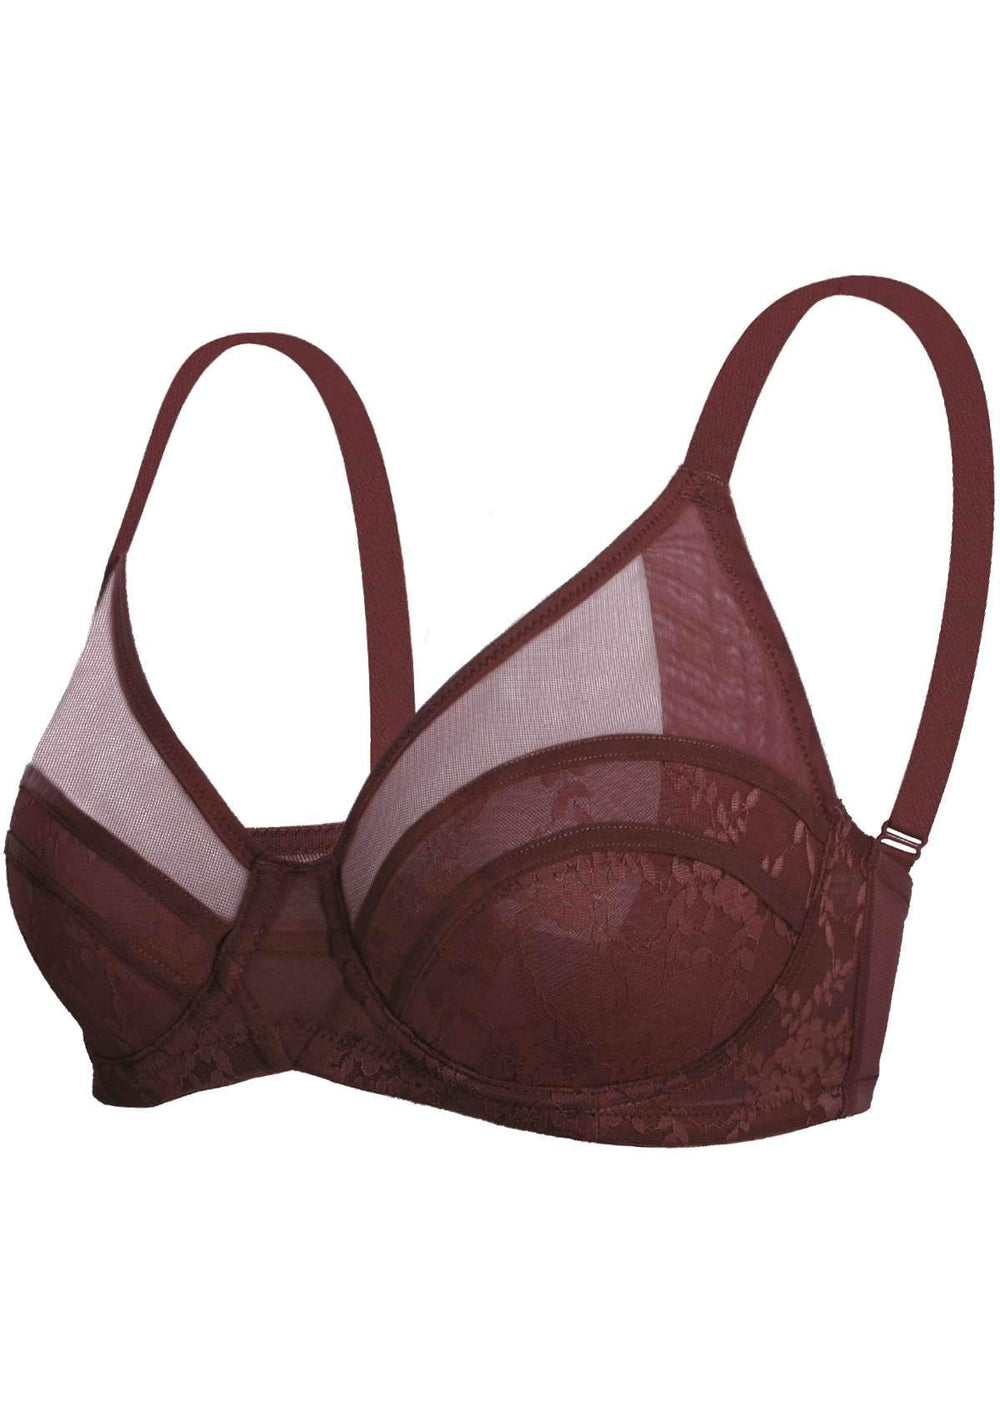 Wine Red Sheer Lace Unlined Unpadded Bra With Thin Net Band And